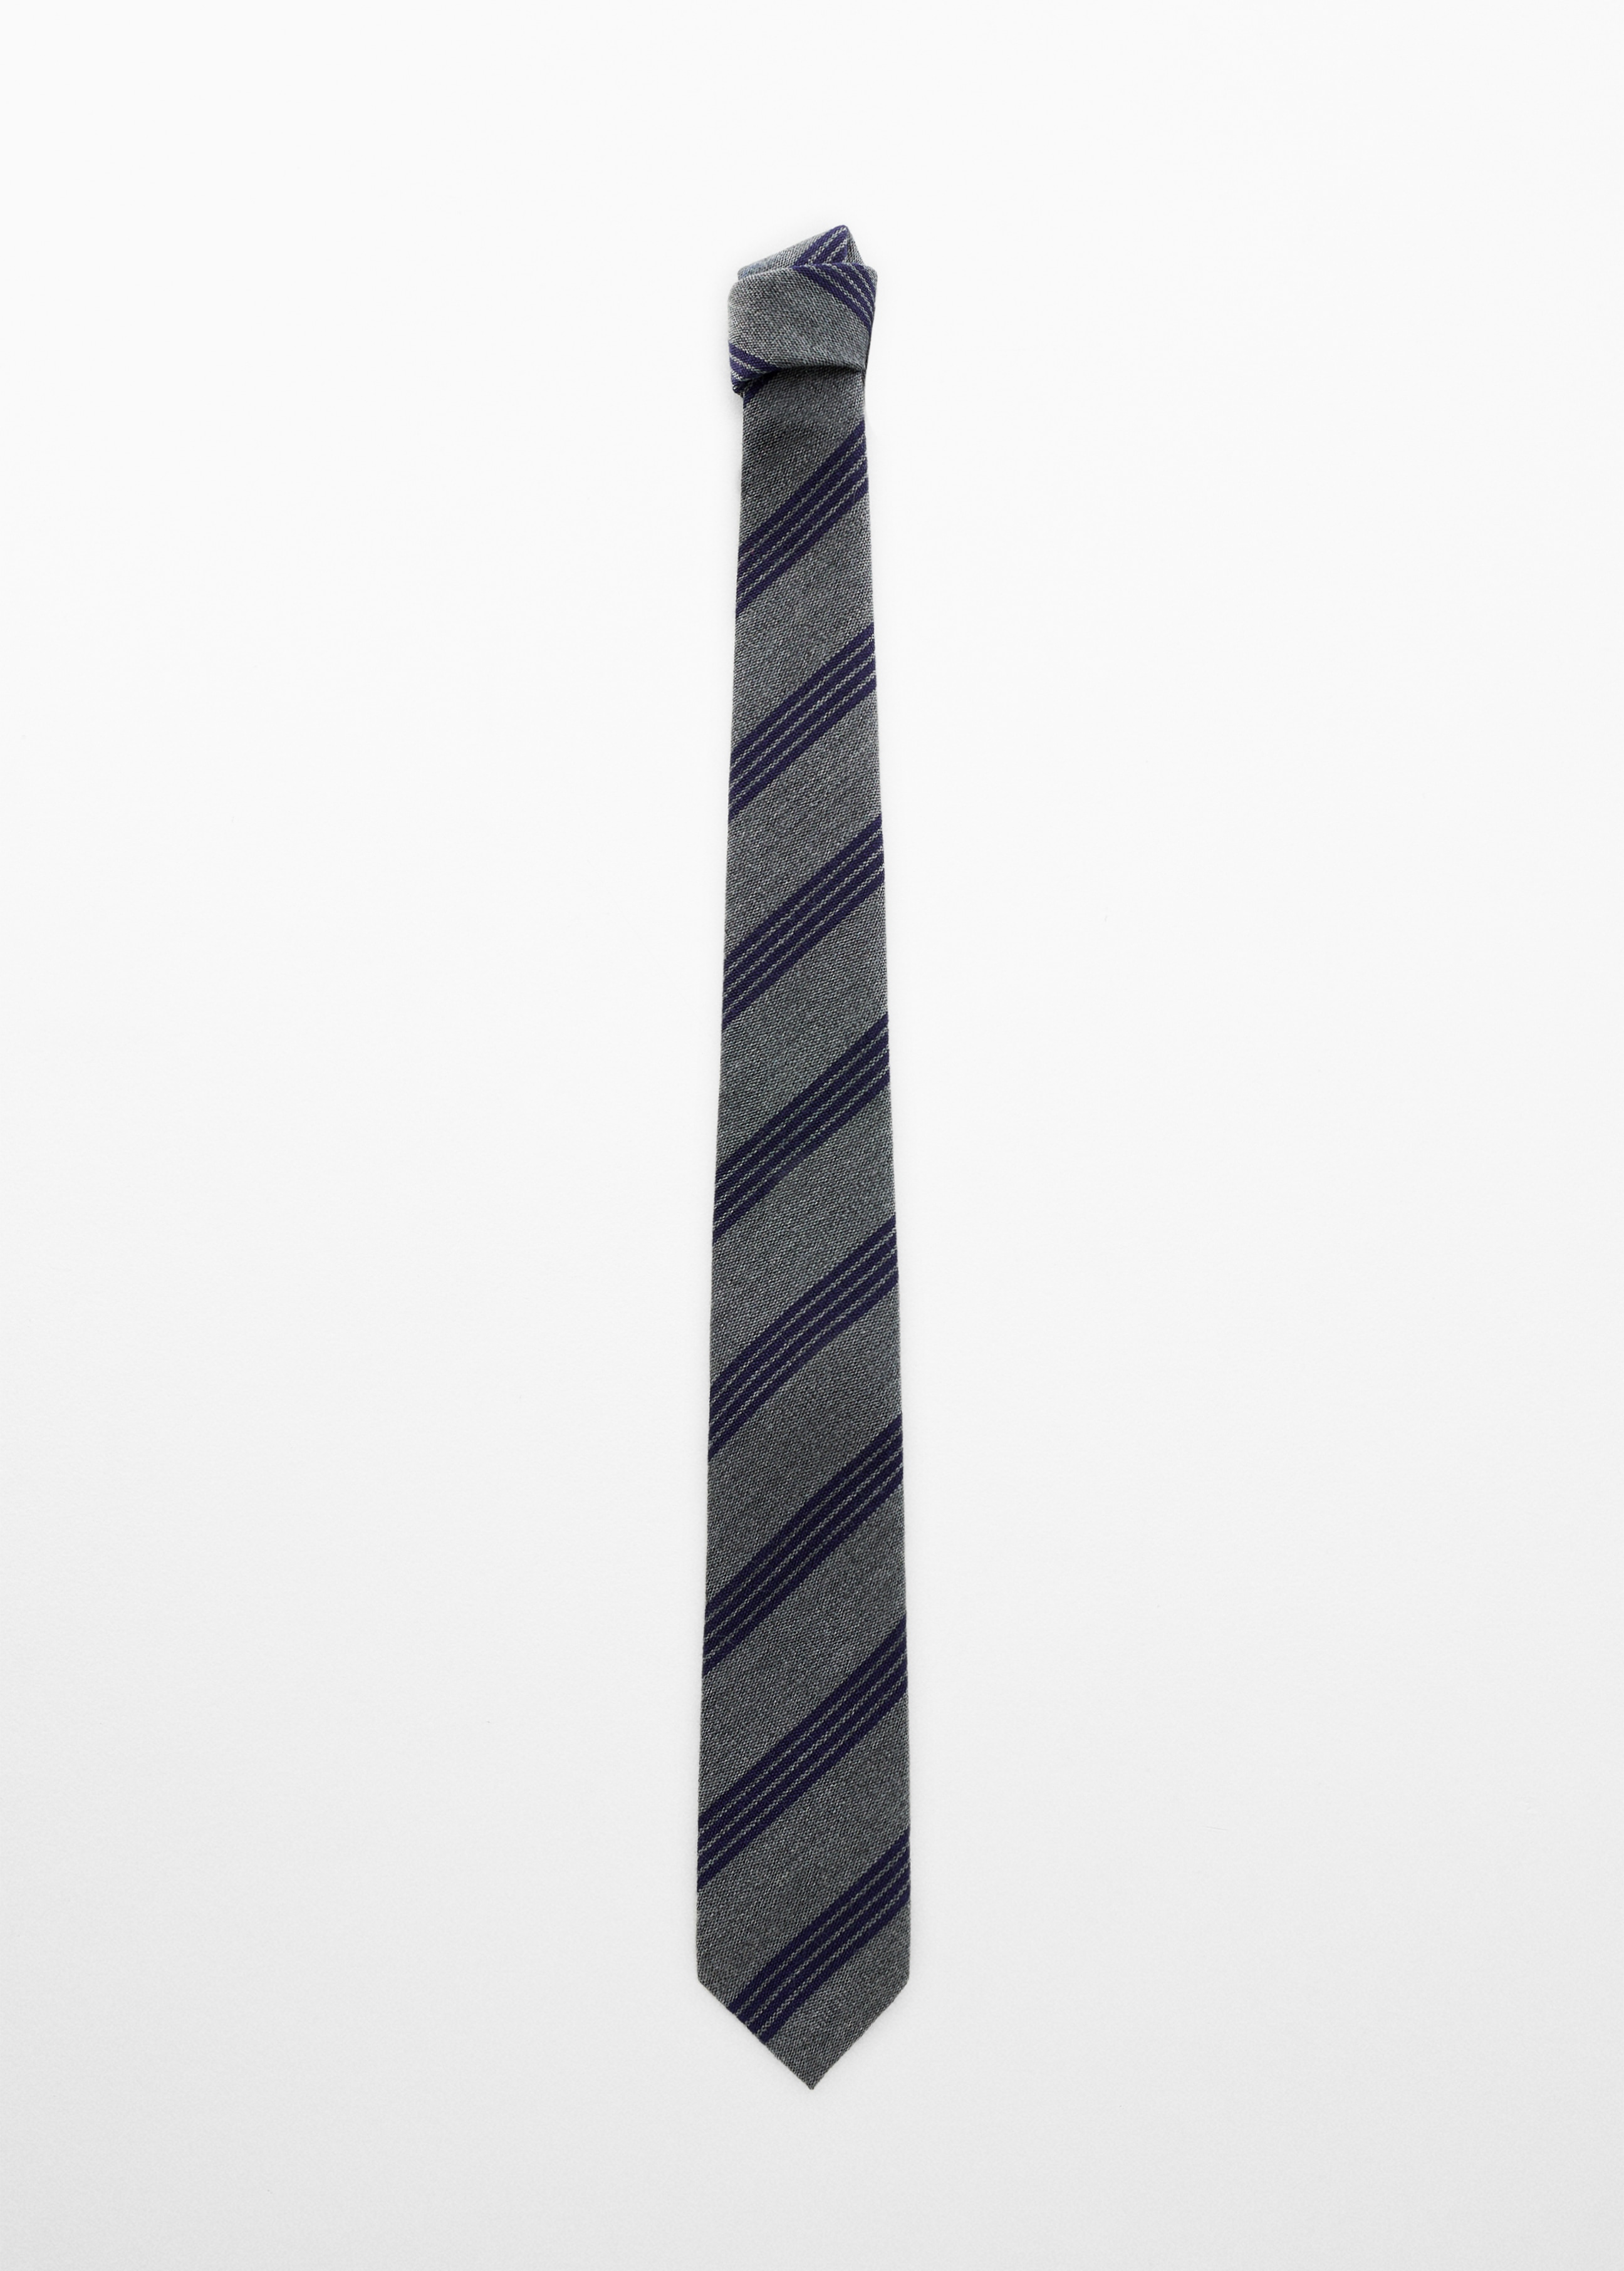 Crease-resistant wool tie - Article without model